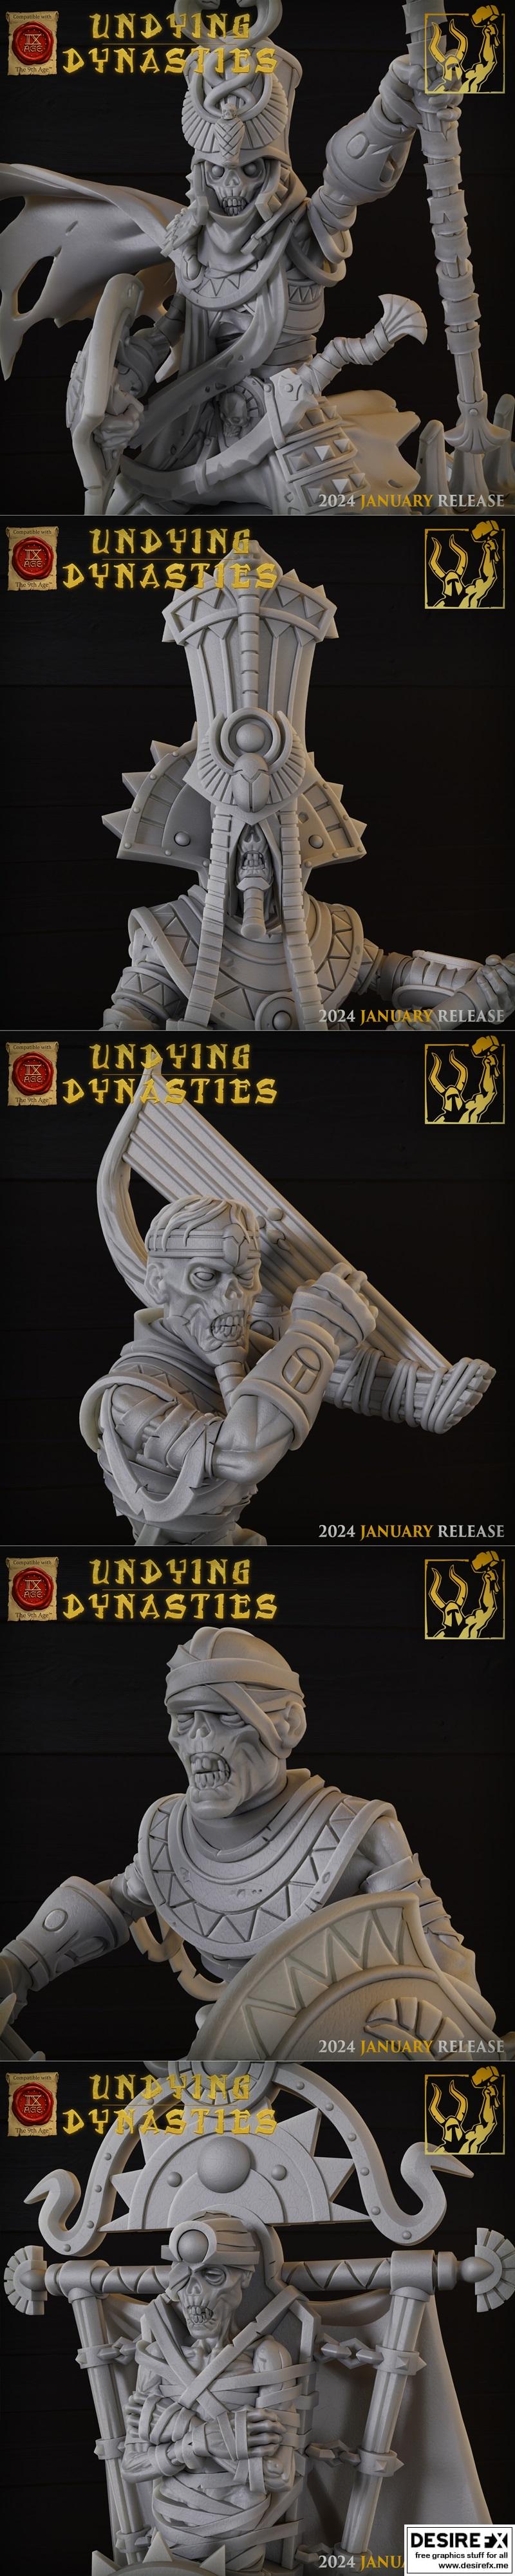 Desire FX 3d models | Titan-Forge Miniatures – Undying Dynasties vol1 ...